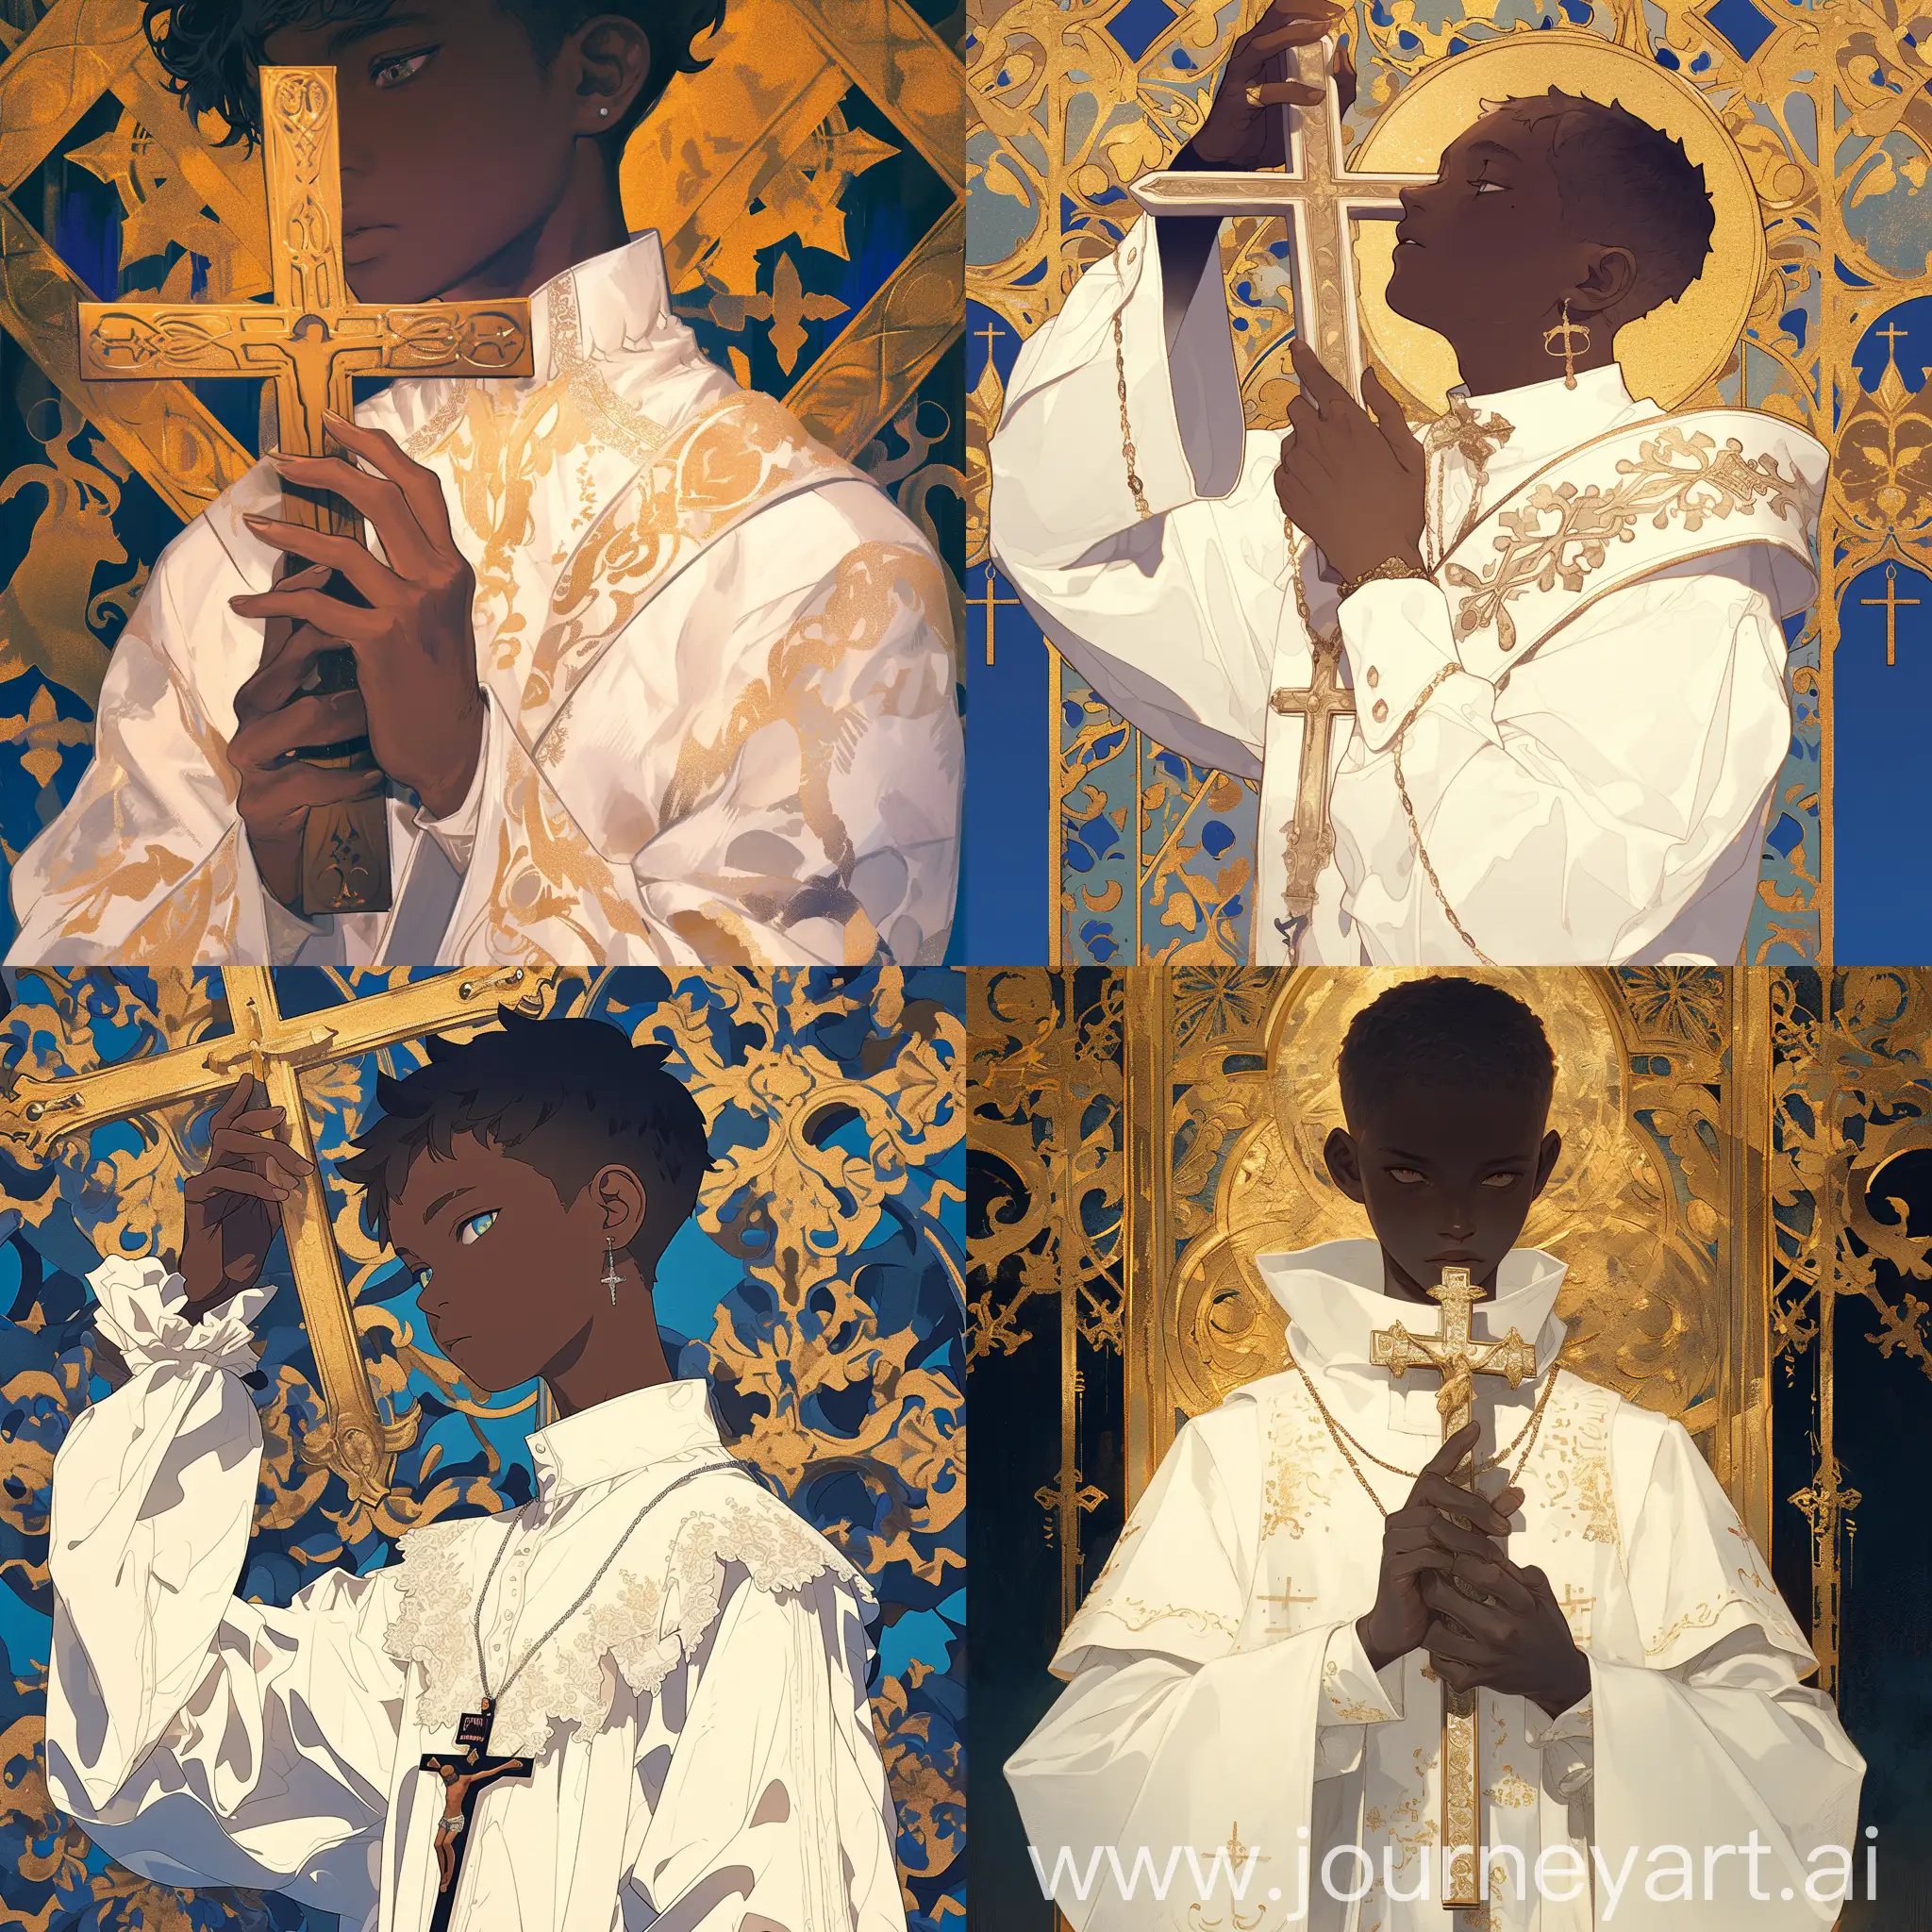 a dark skin boy in white holding a crucifix, in the style of
bold graphic comic book art, rococo pastel colors,
anime-inspired, hyper-realistic portraits, dark azure and
gold, gender-bending iconography, victorian-inspired
illustrations --niji 6